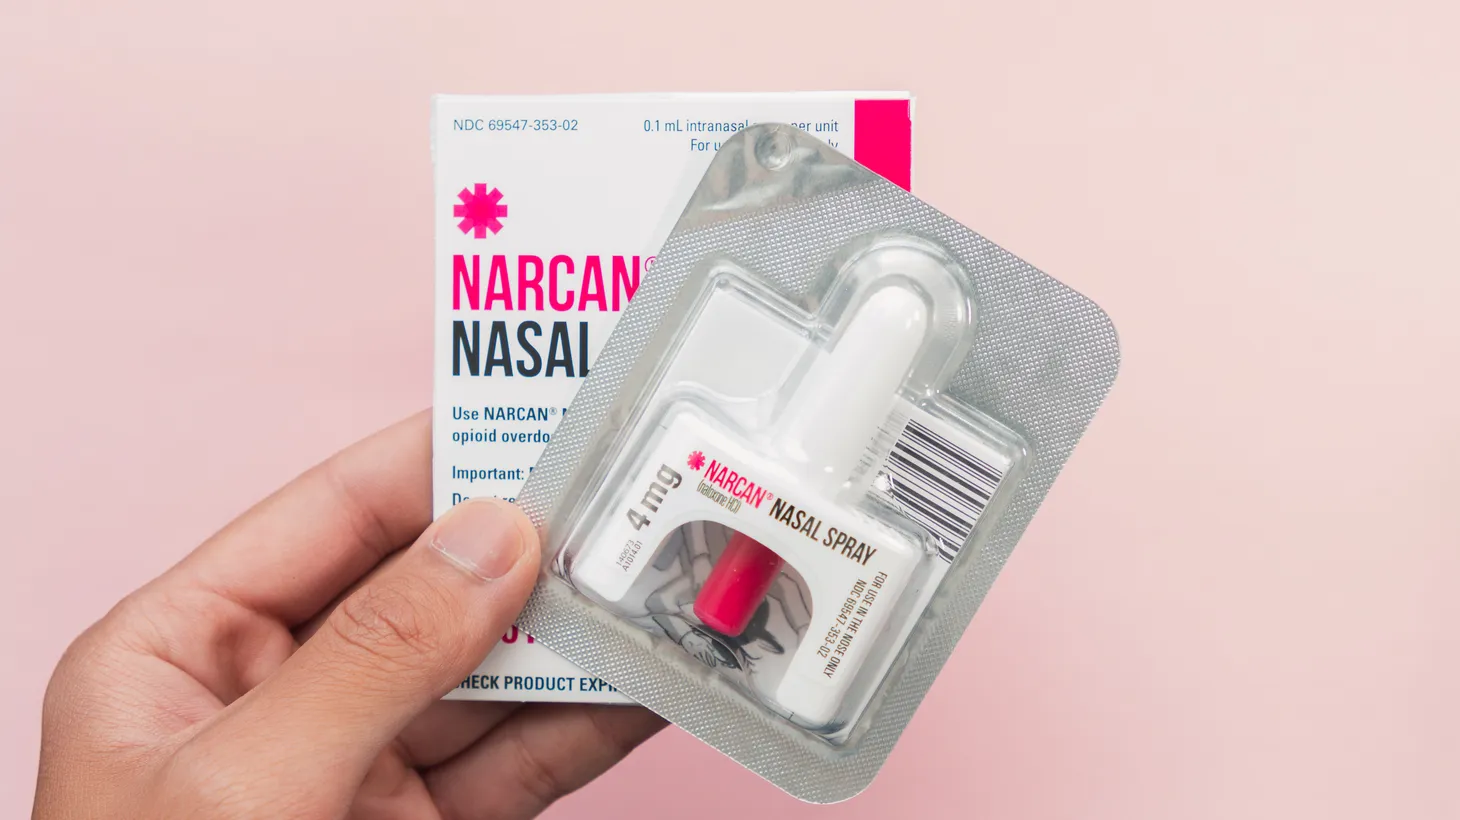 Narcan is a nasal spray that can be used to revive someone from a drug overdose. An LA County initiative aims to distribute 50,000 boxes of them.